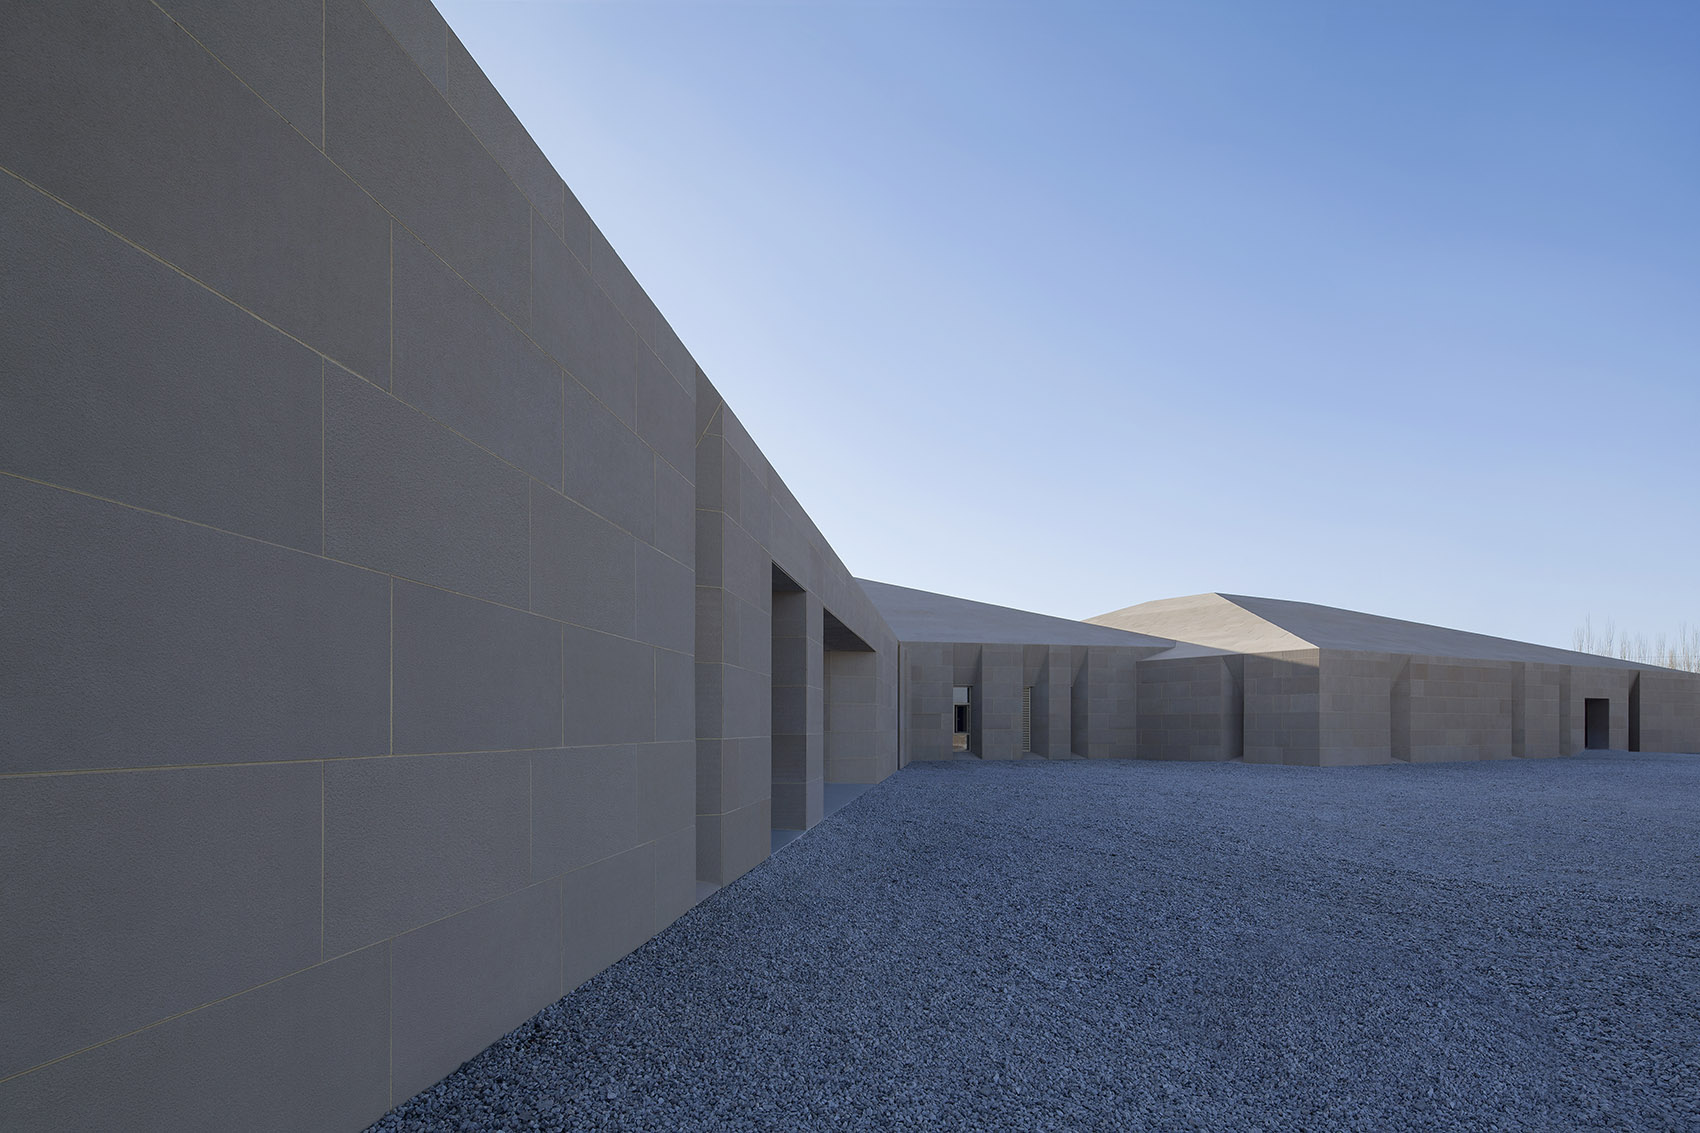 003-dunhuang-tourism-distributing-center-china-by-biad-zxd-architects.jpg